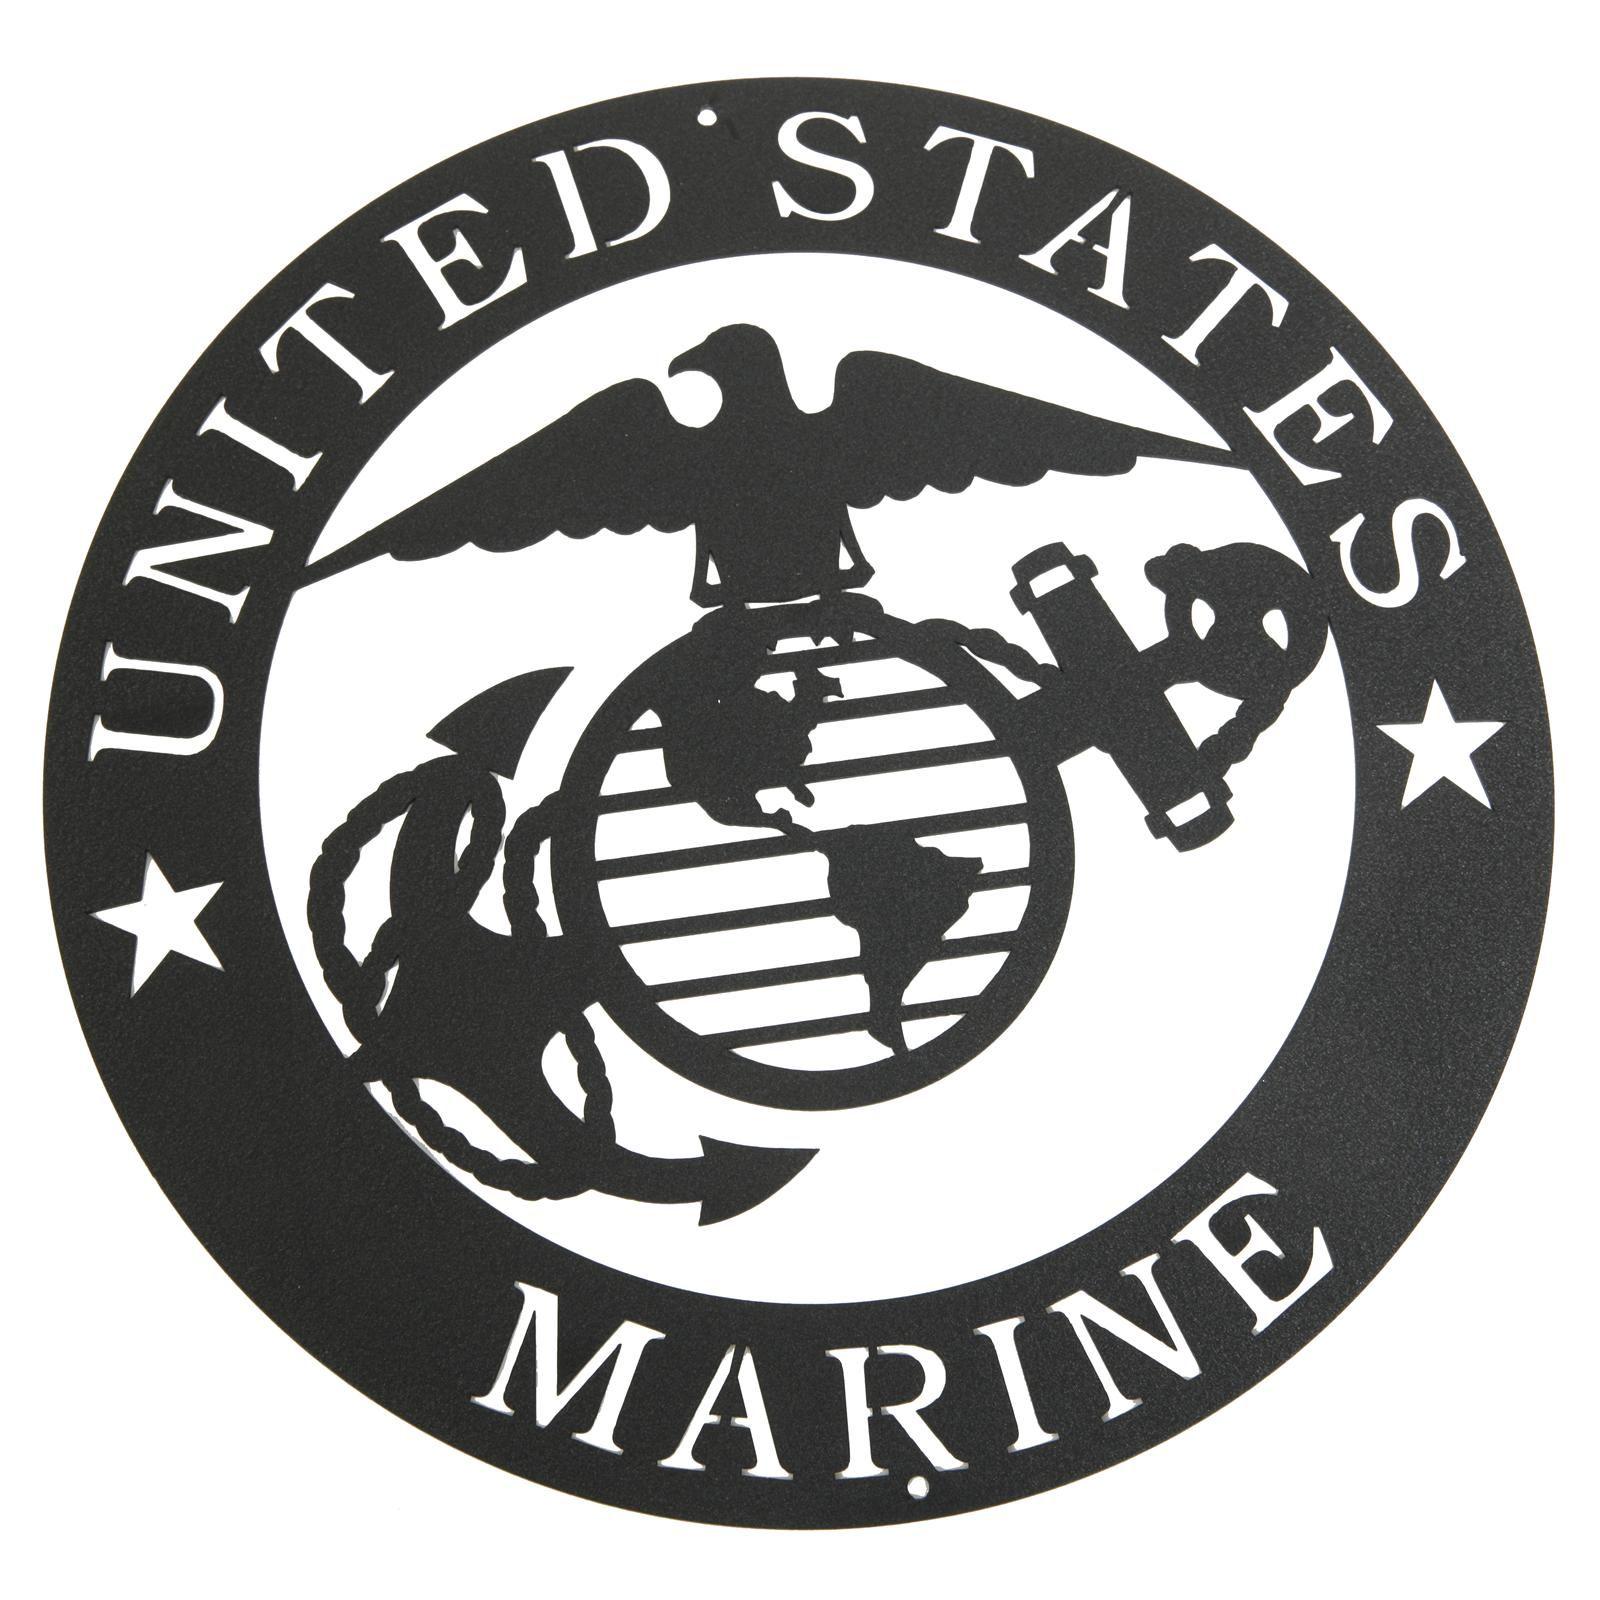 US Marines Logo - Marines Corps Emblem Metal Silhouette 3025 - Free Shipping on Orders ...